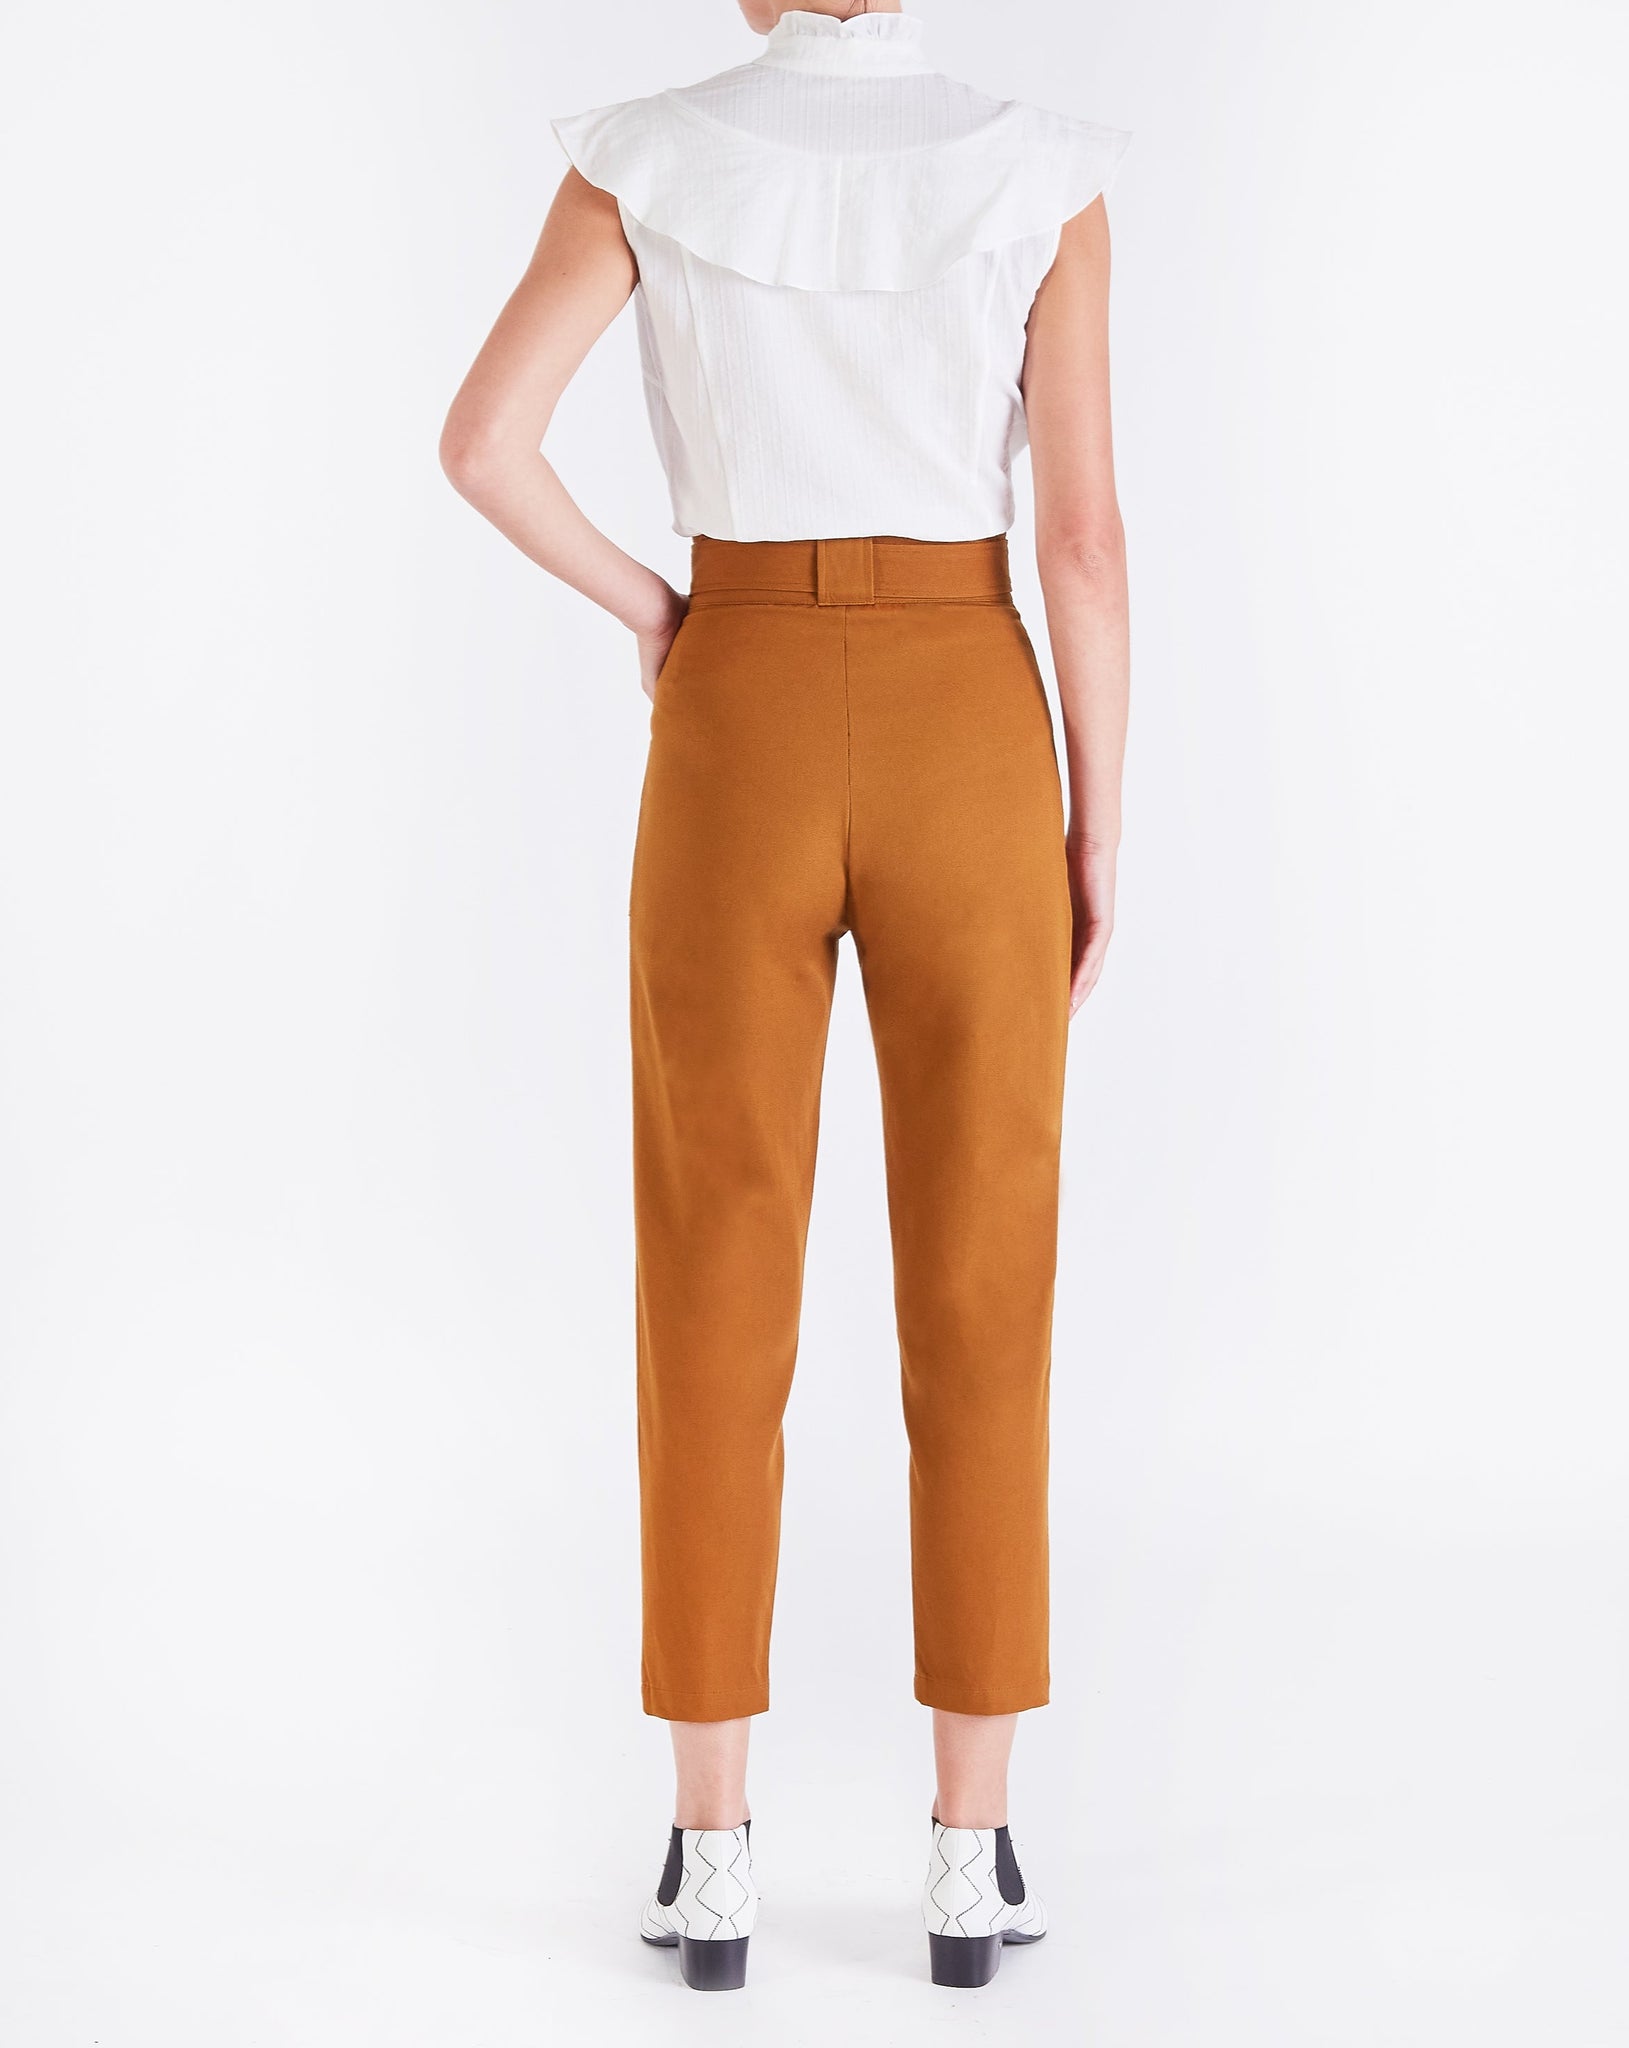 Val UTILITY BELTED PEG TROUSERS - GOLDEN BROWN